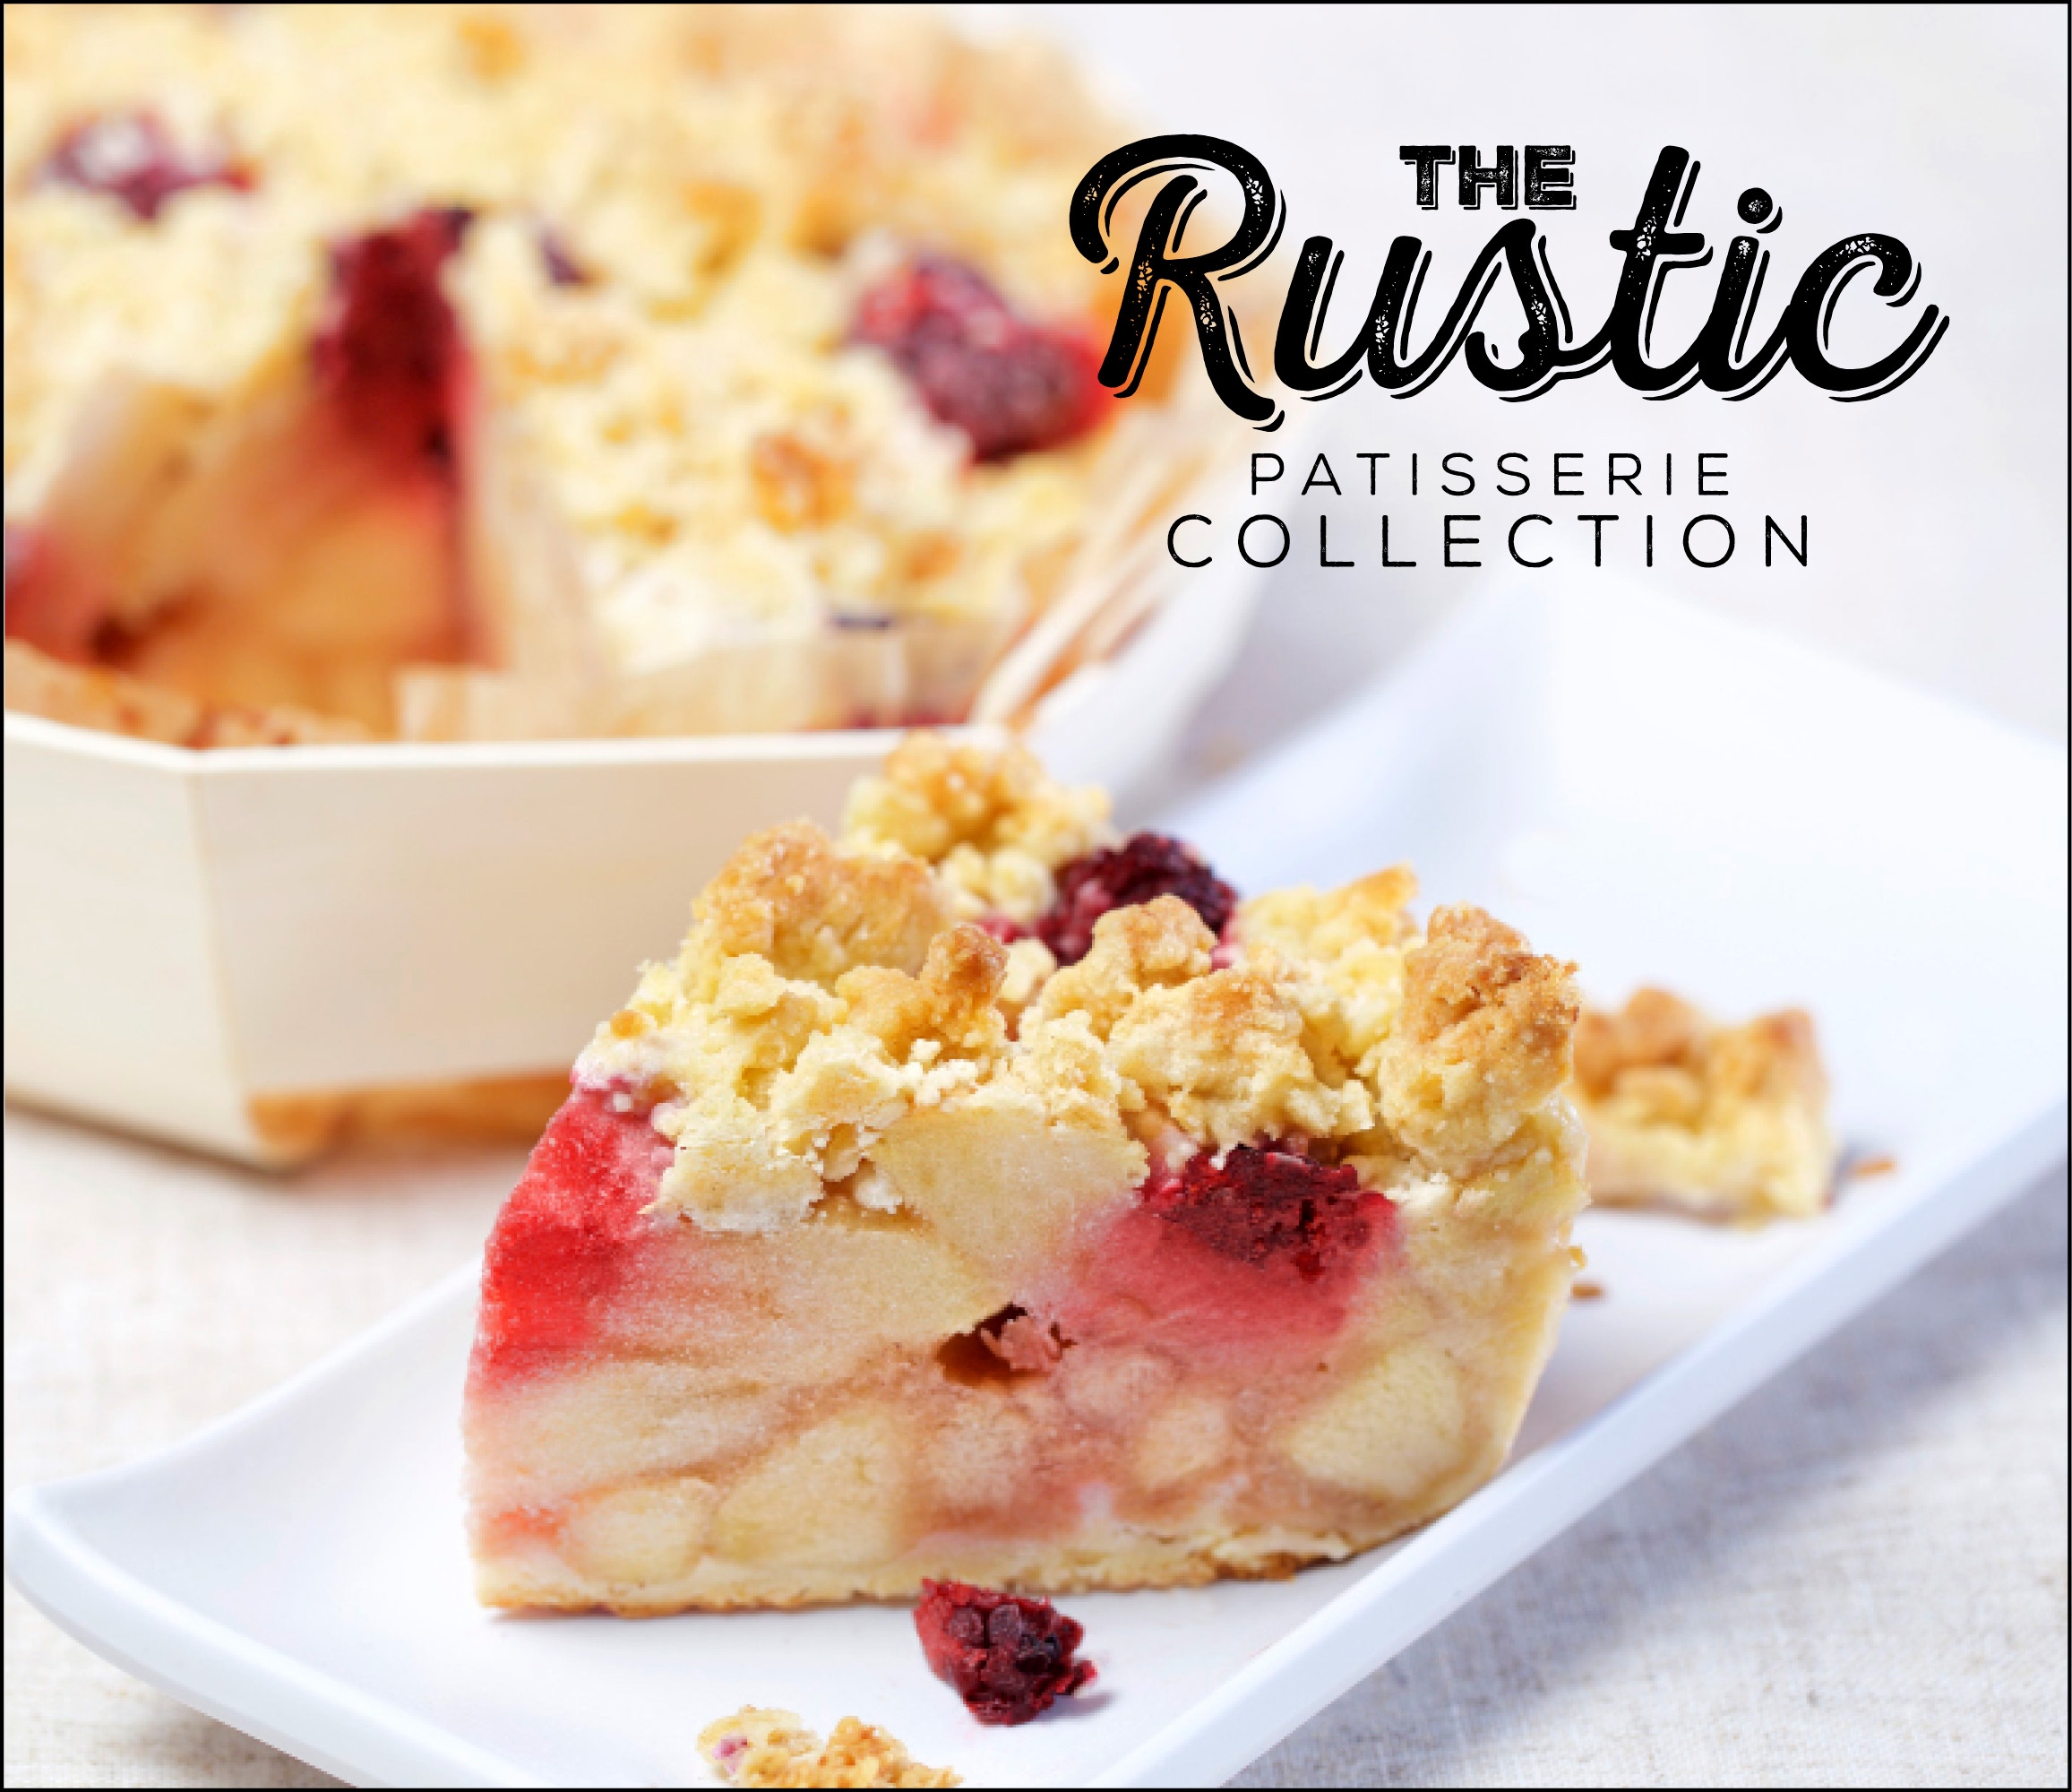 The Rustic Patisserie Selection by Belgique